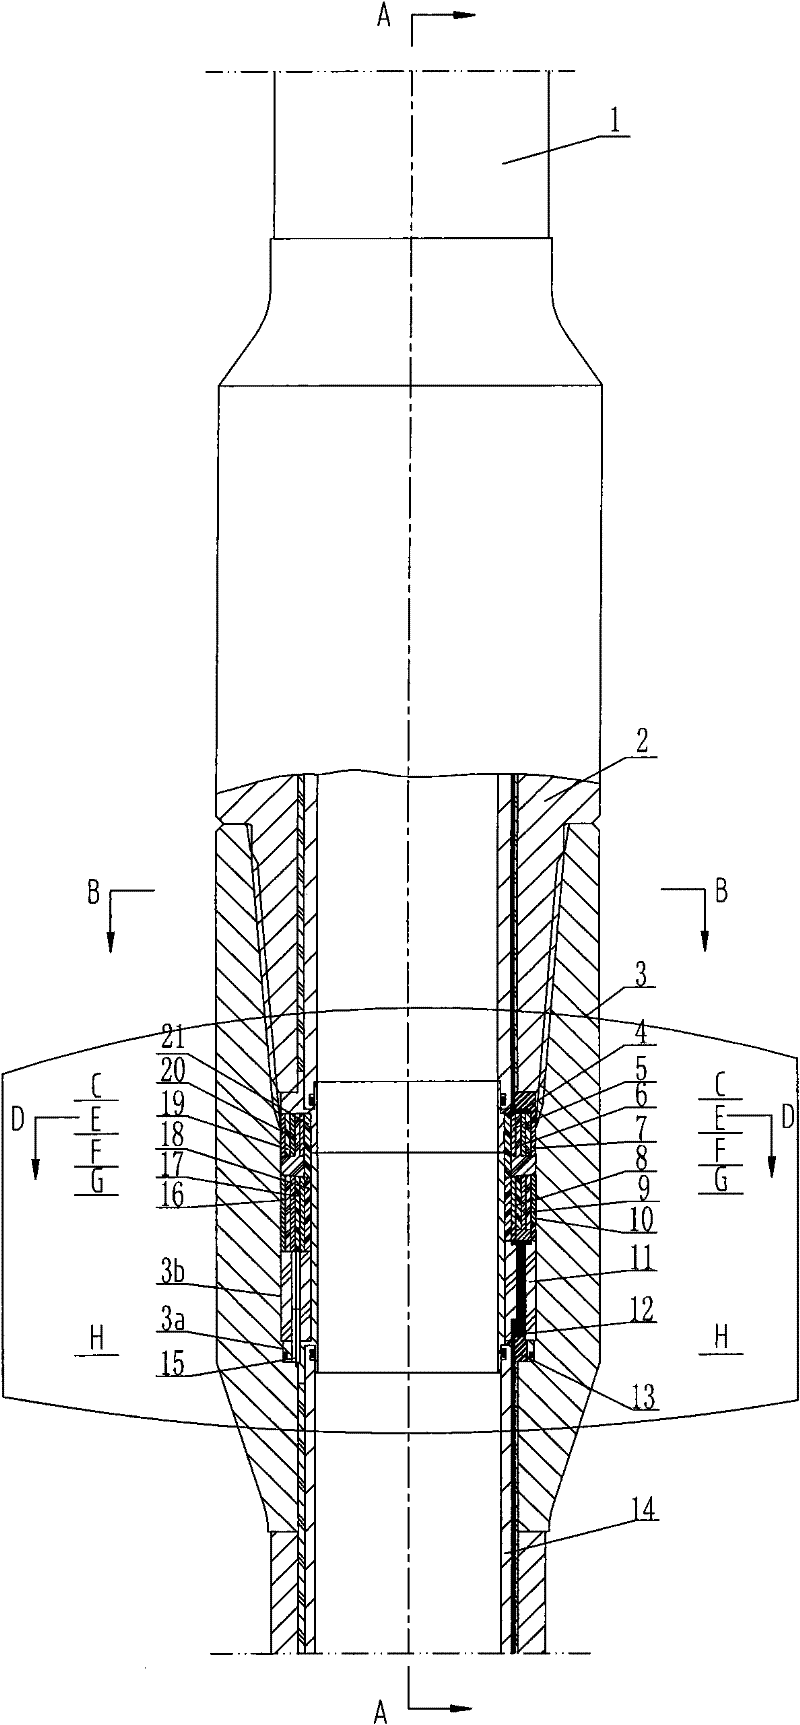 Power and signal transmission drill stem